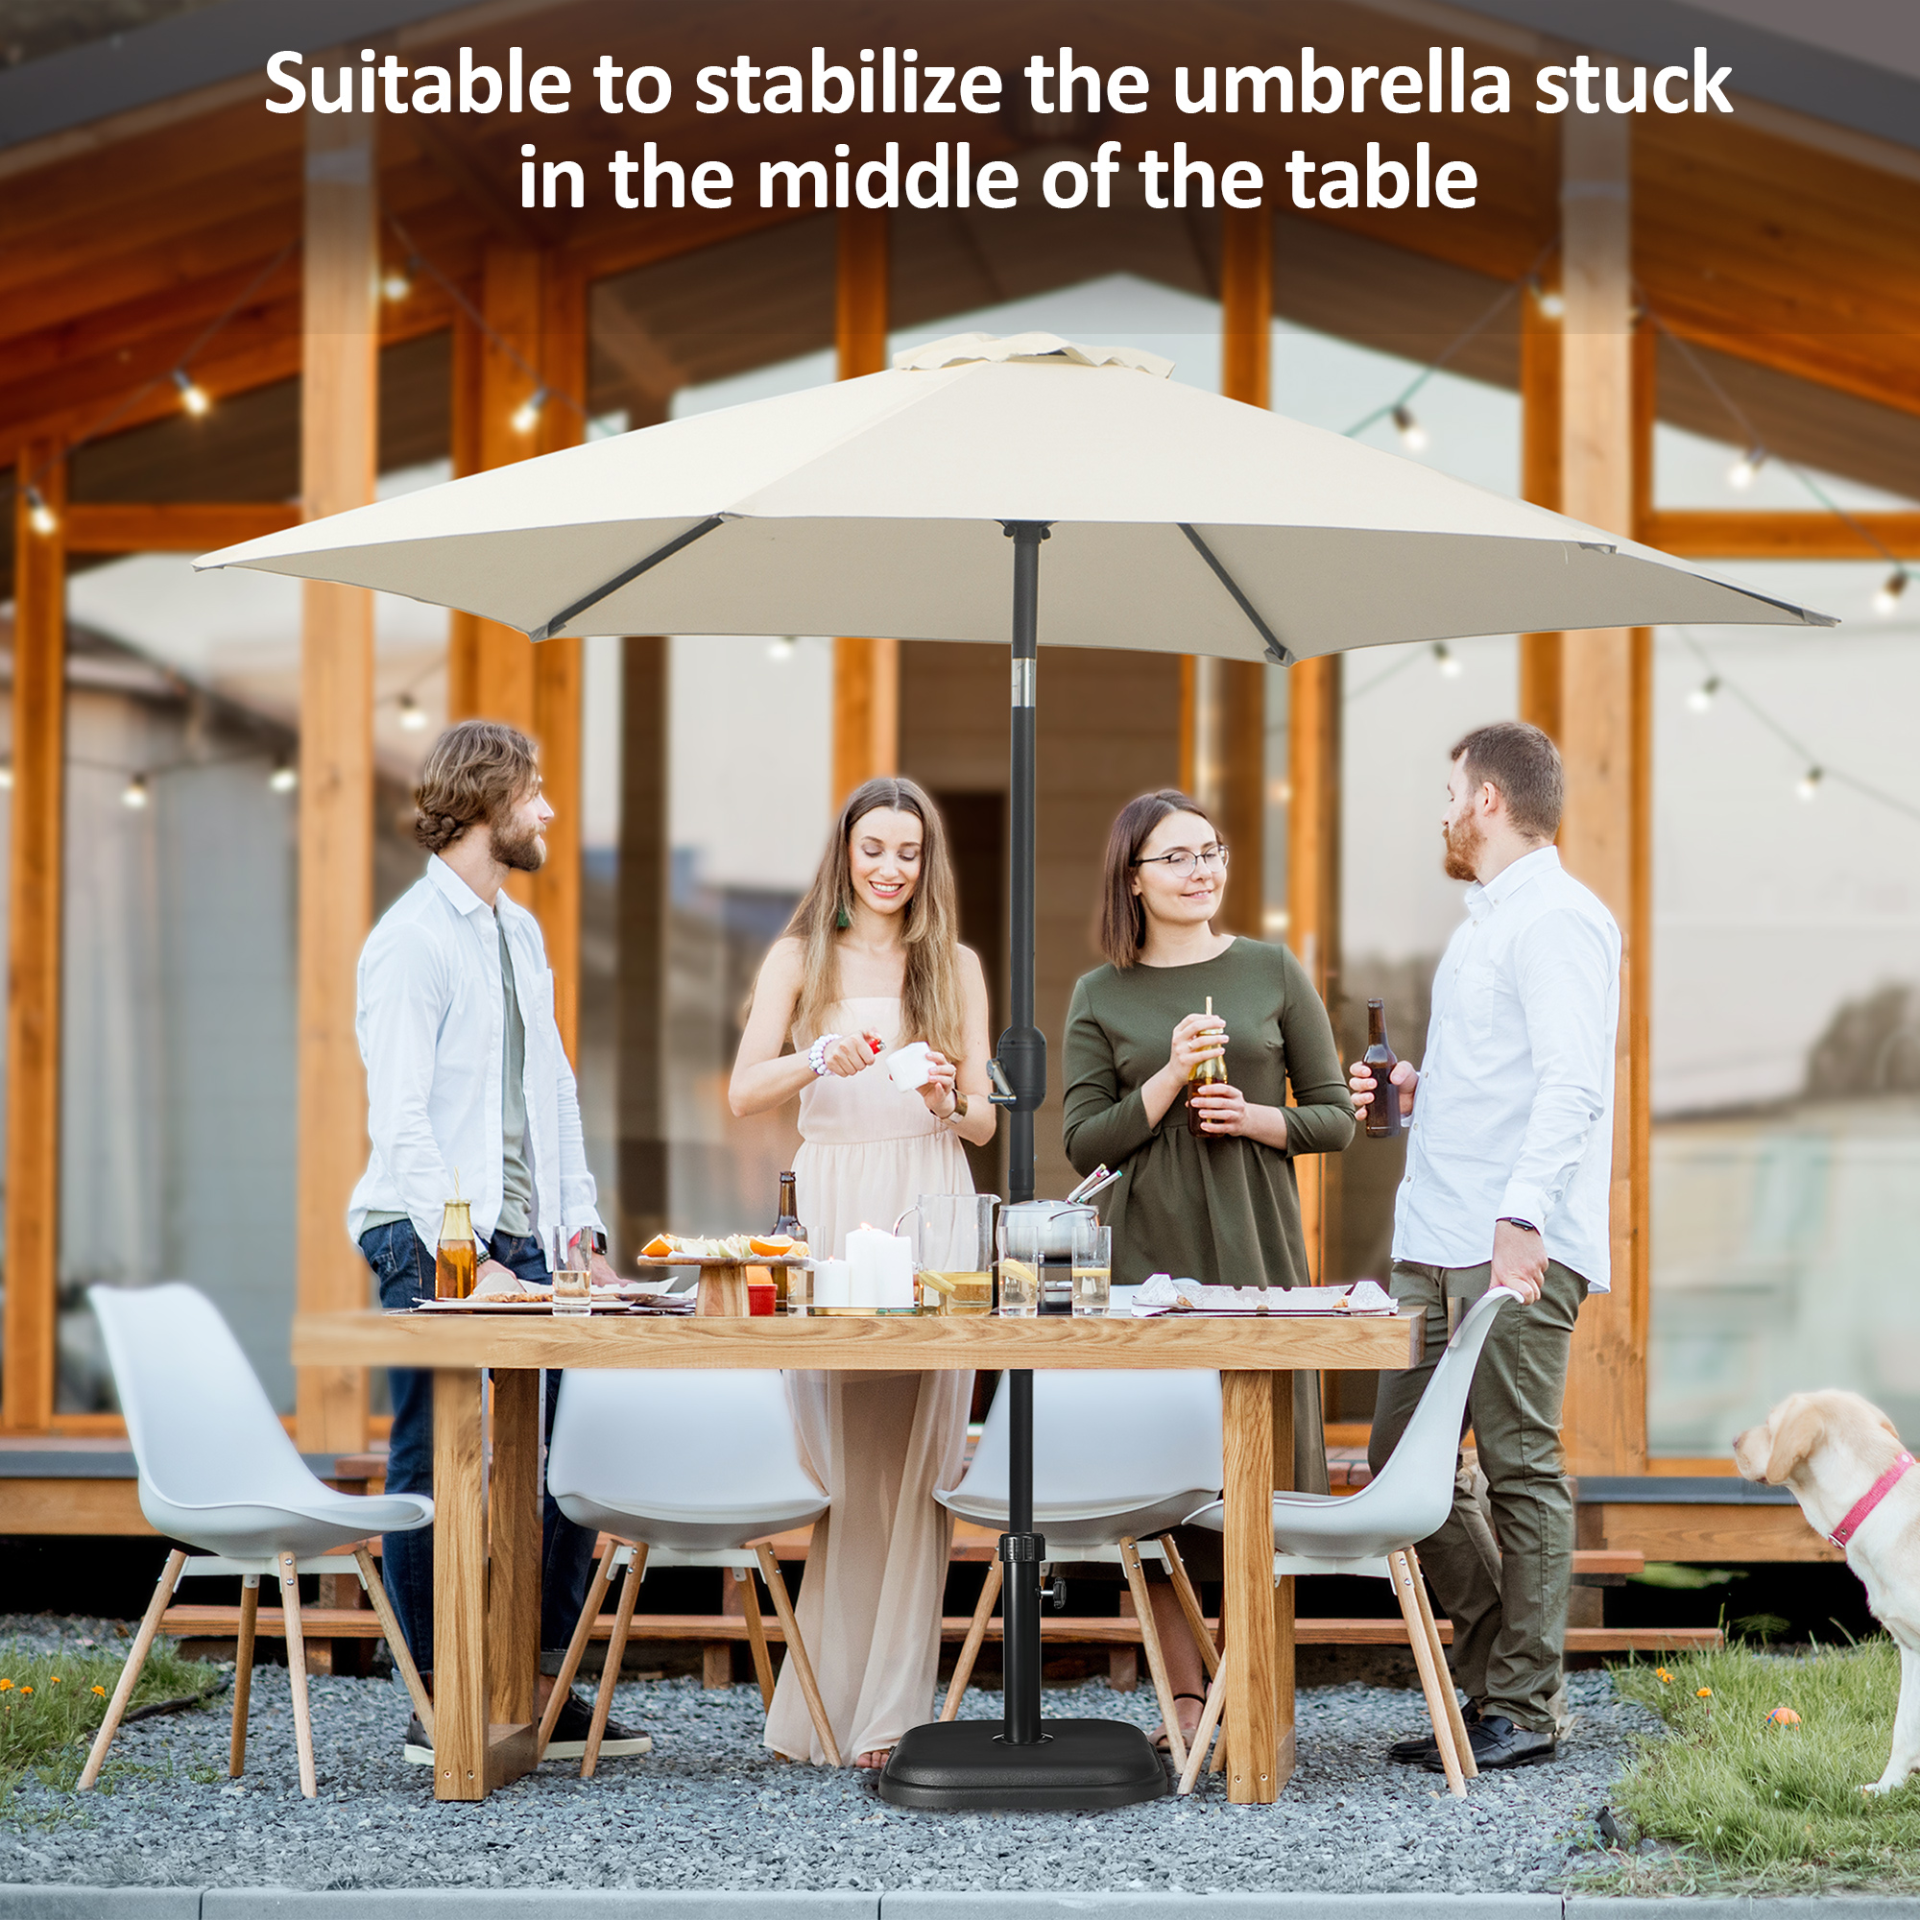 Outsunny 11kg Concrete Garden Parasol Base Holder, Square Outdoor Table Umbrella Stand Weight, Black